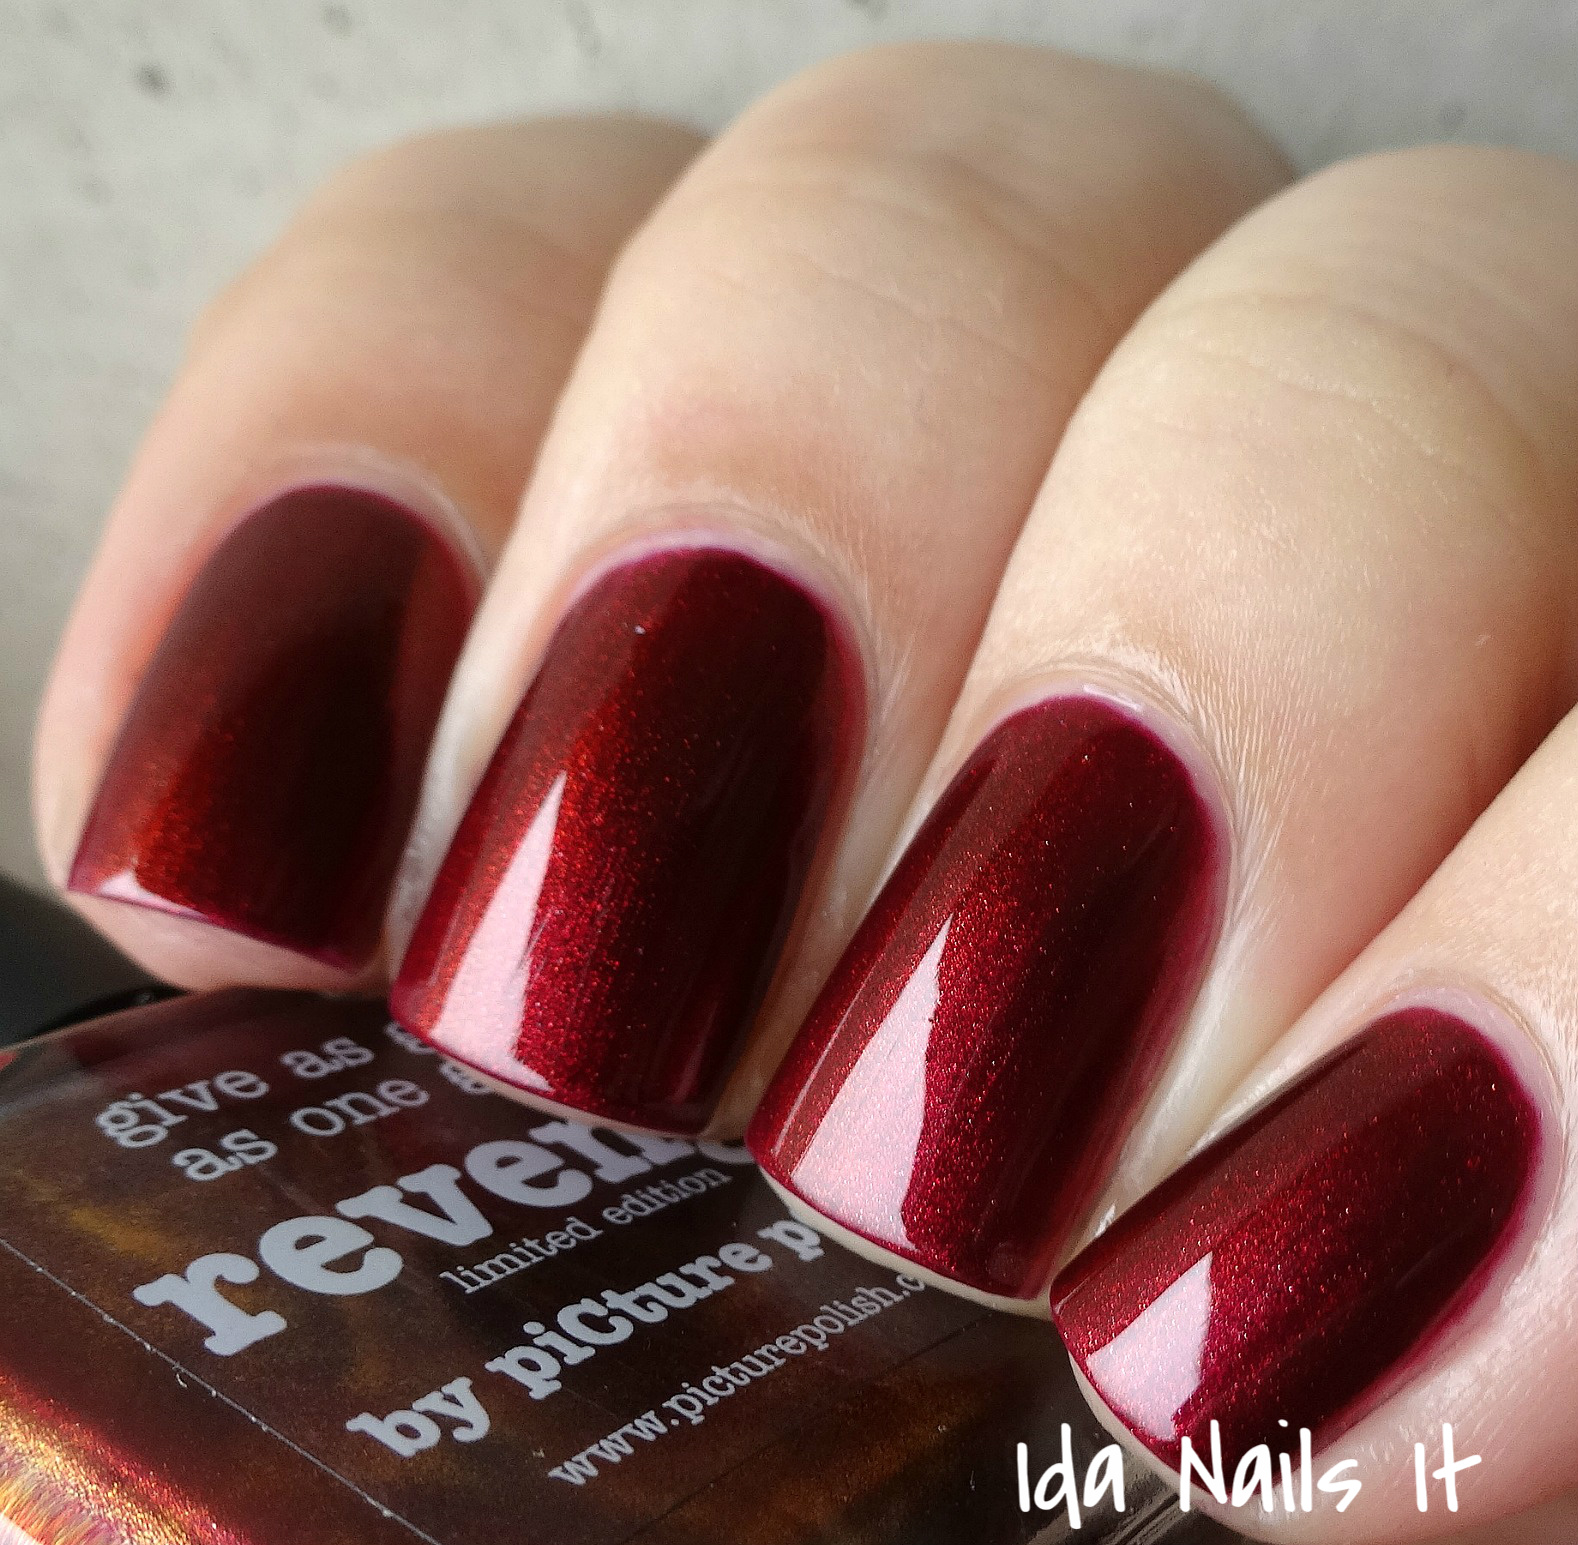 Ida Nails It: piCture pOlish Obsession, Poison, and Revenge from the ...